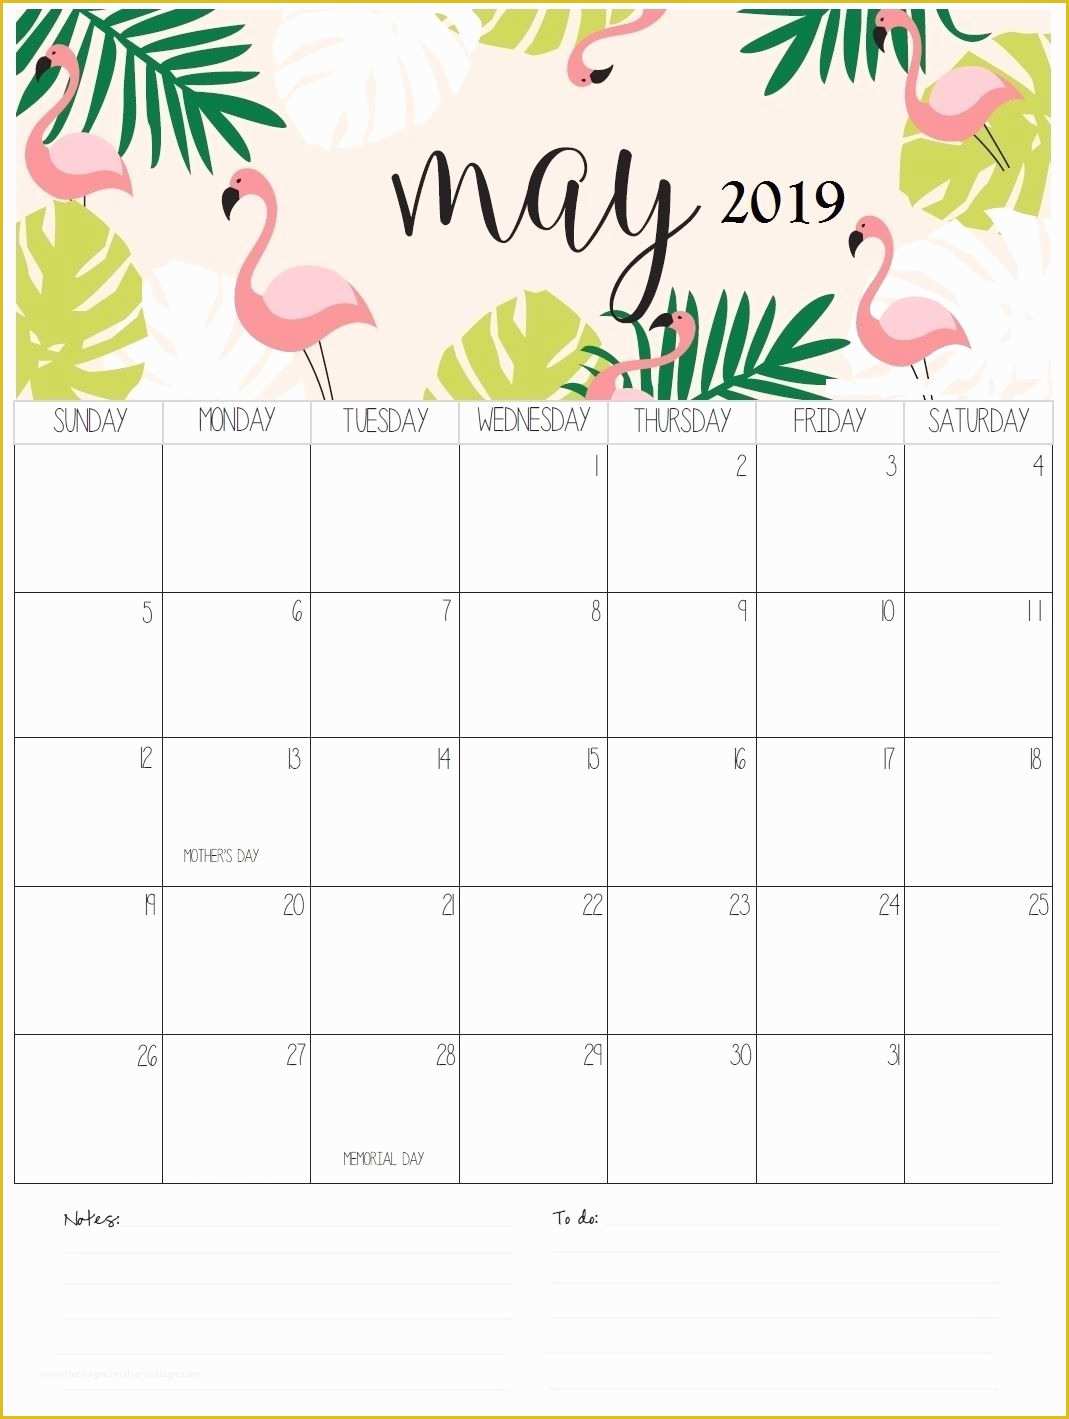 Holiday Schedule Template Free Of May 2019 Printable Calendar Template Free